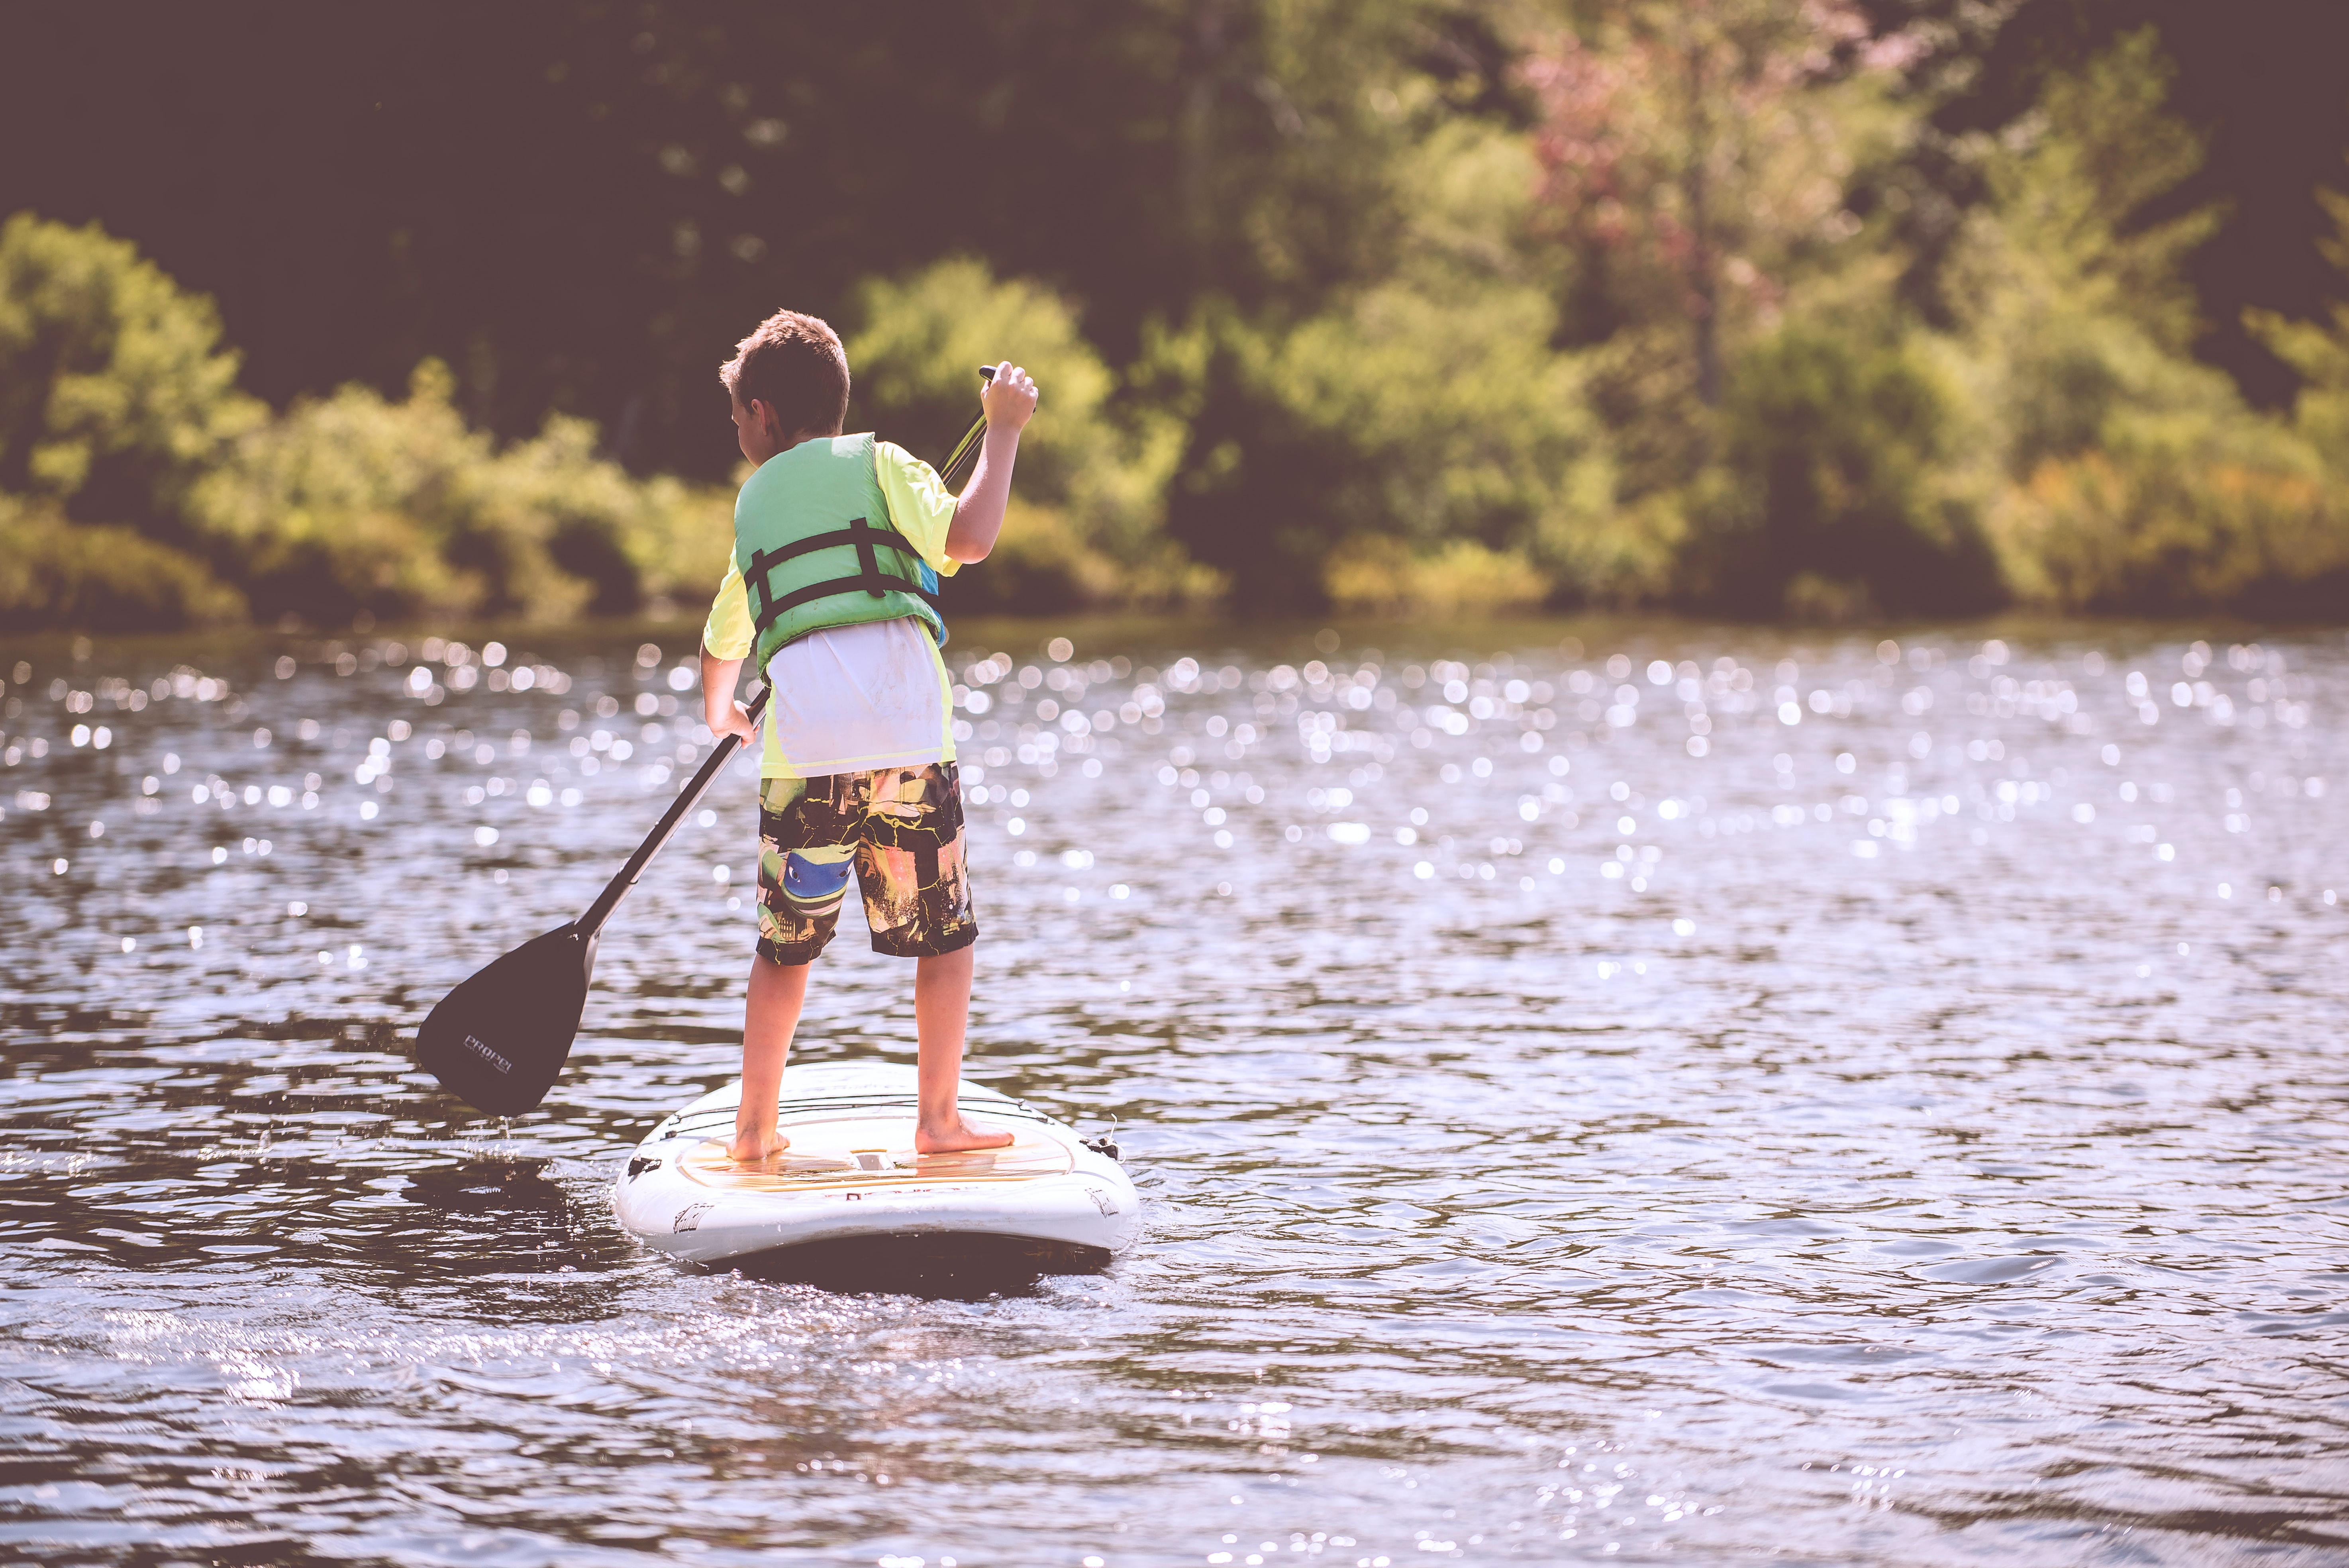 A kid goes paddleboarding on a lake.